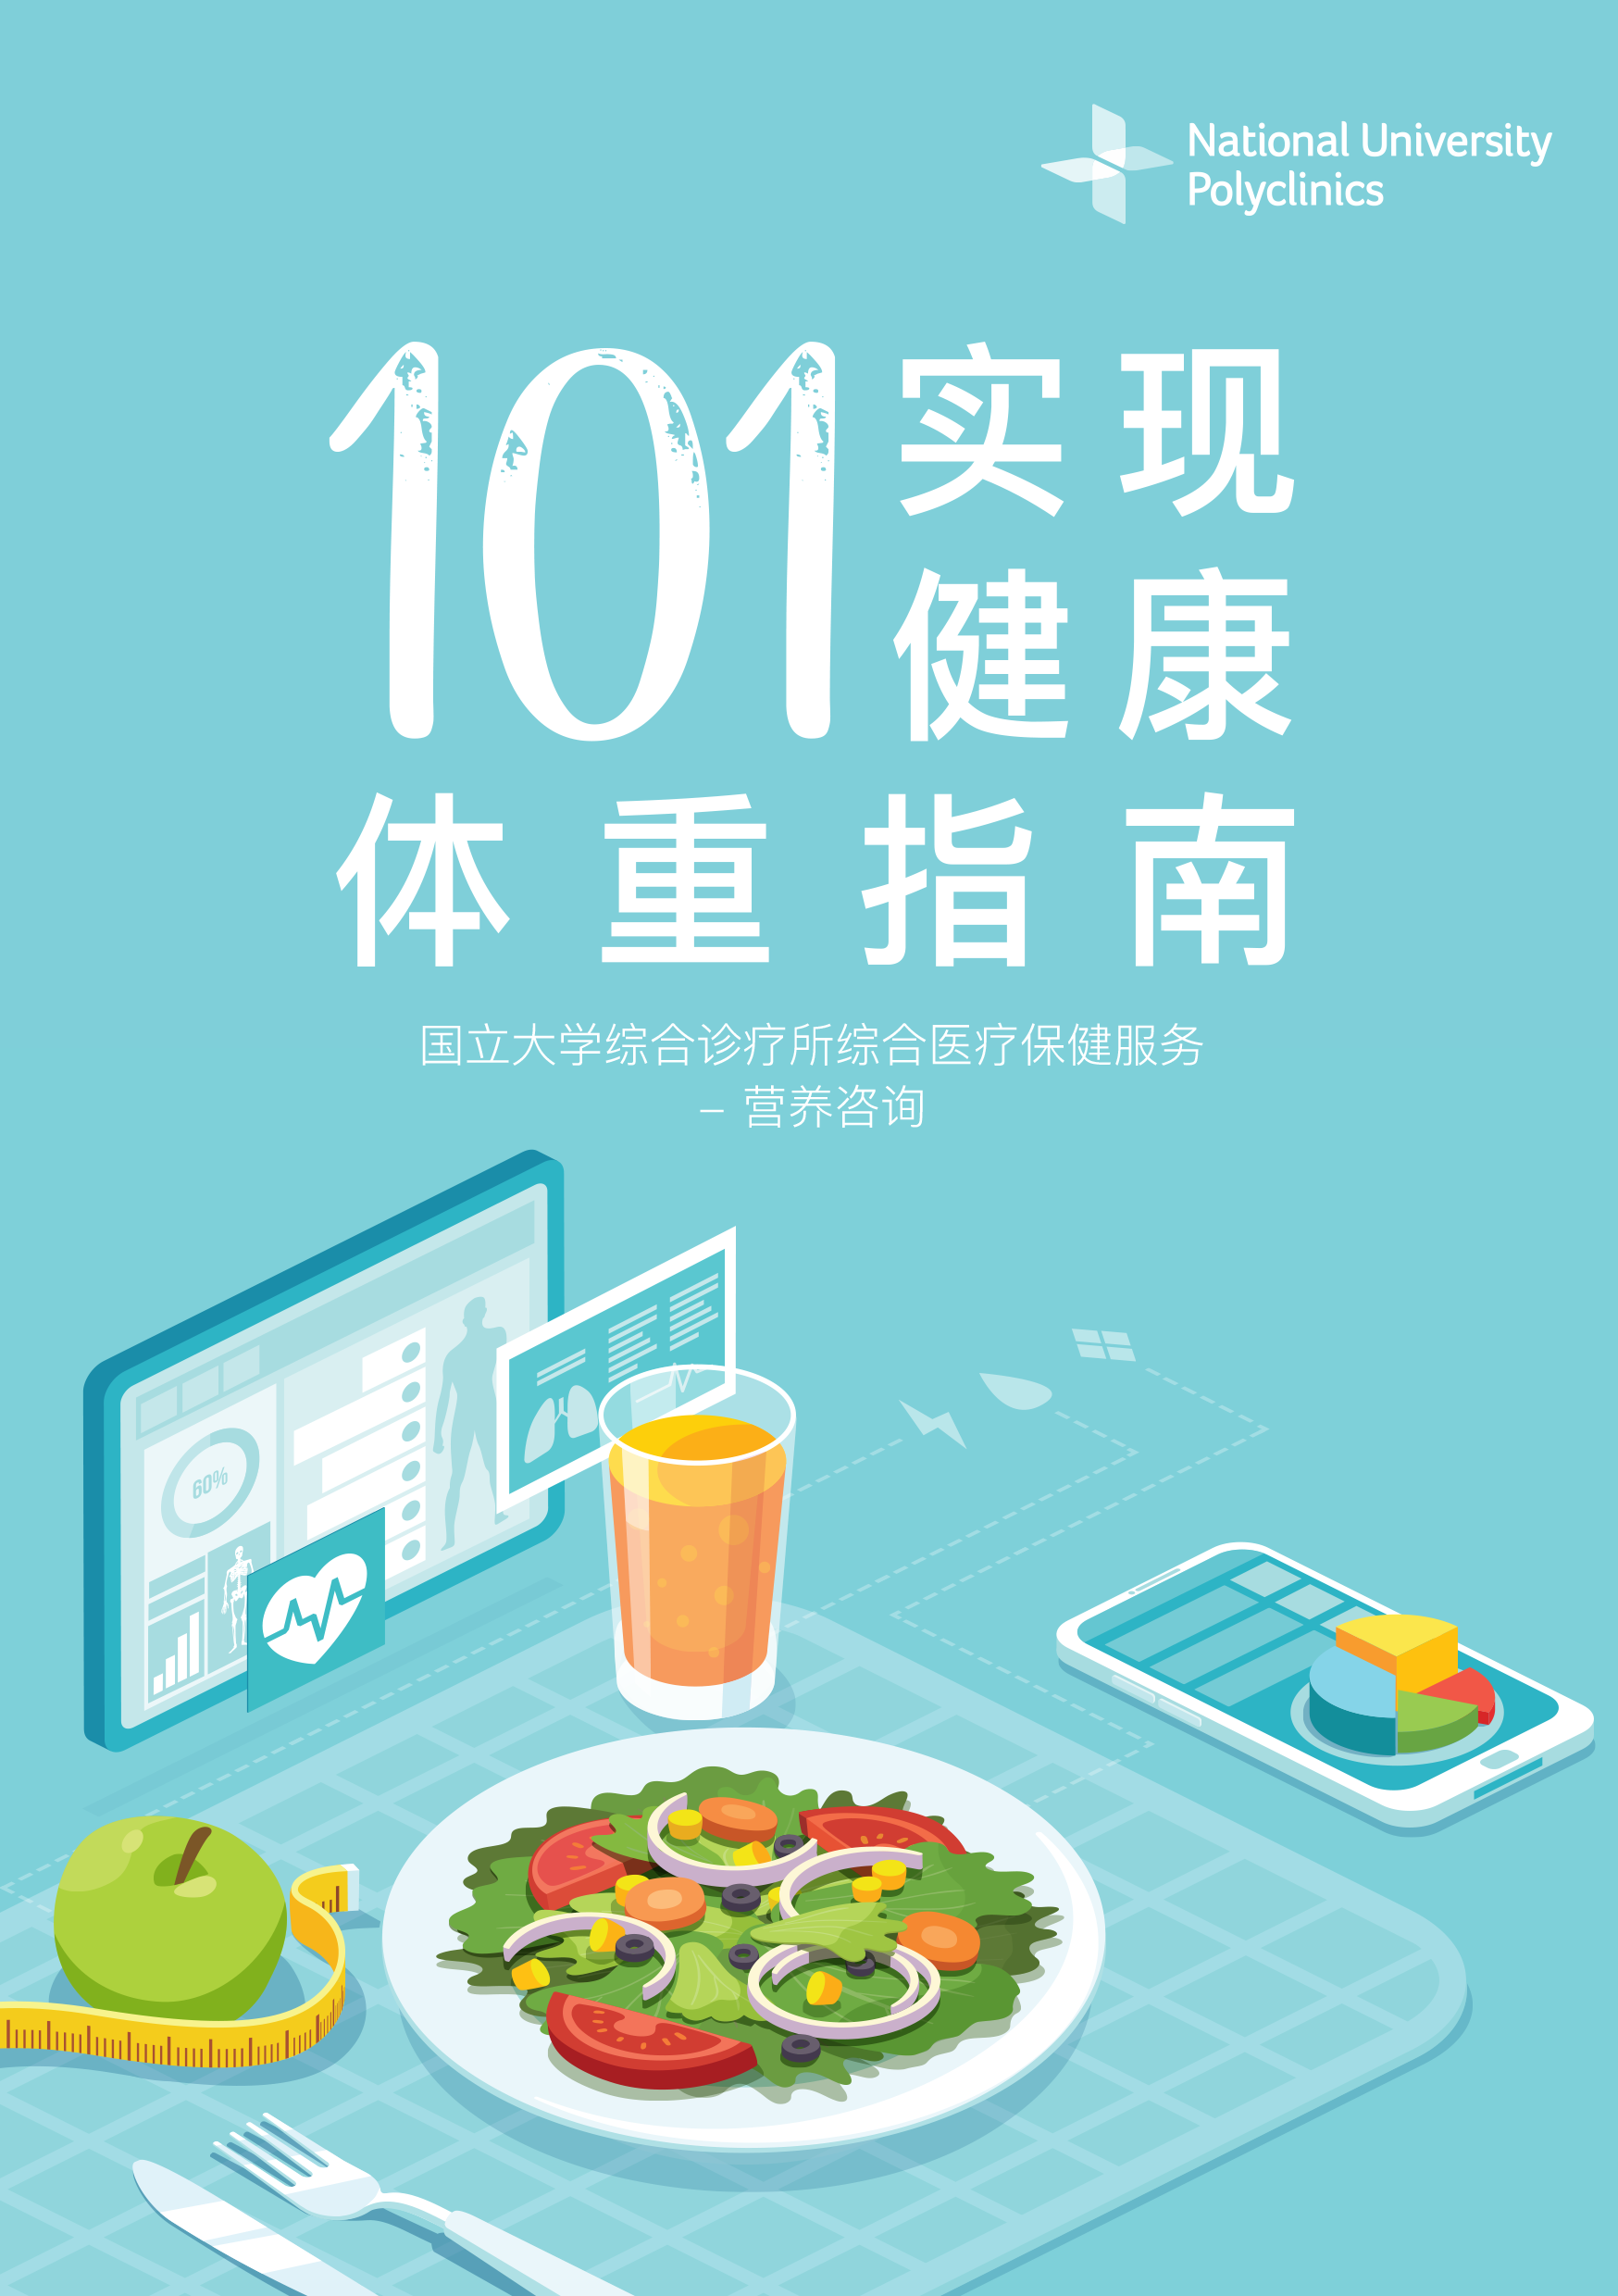 101 Guide to Achieving a Healthy Weight (Chinese)